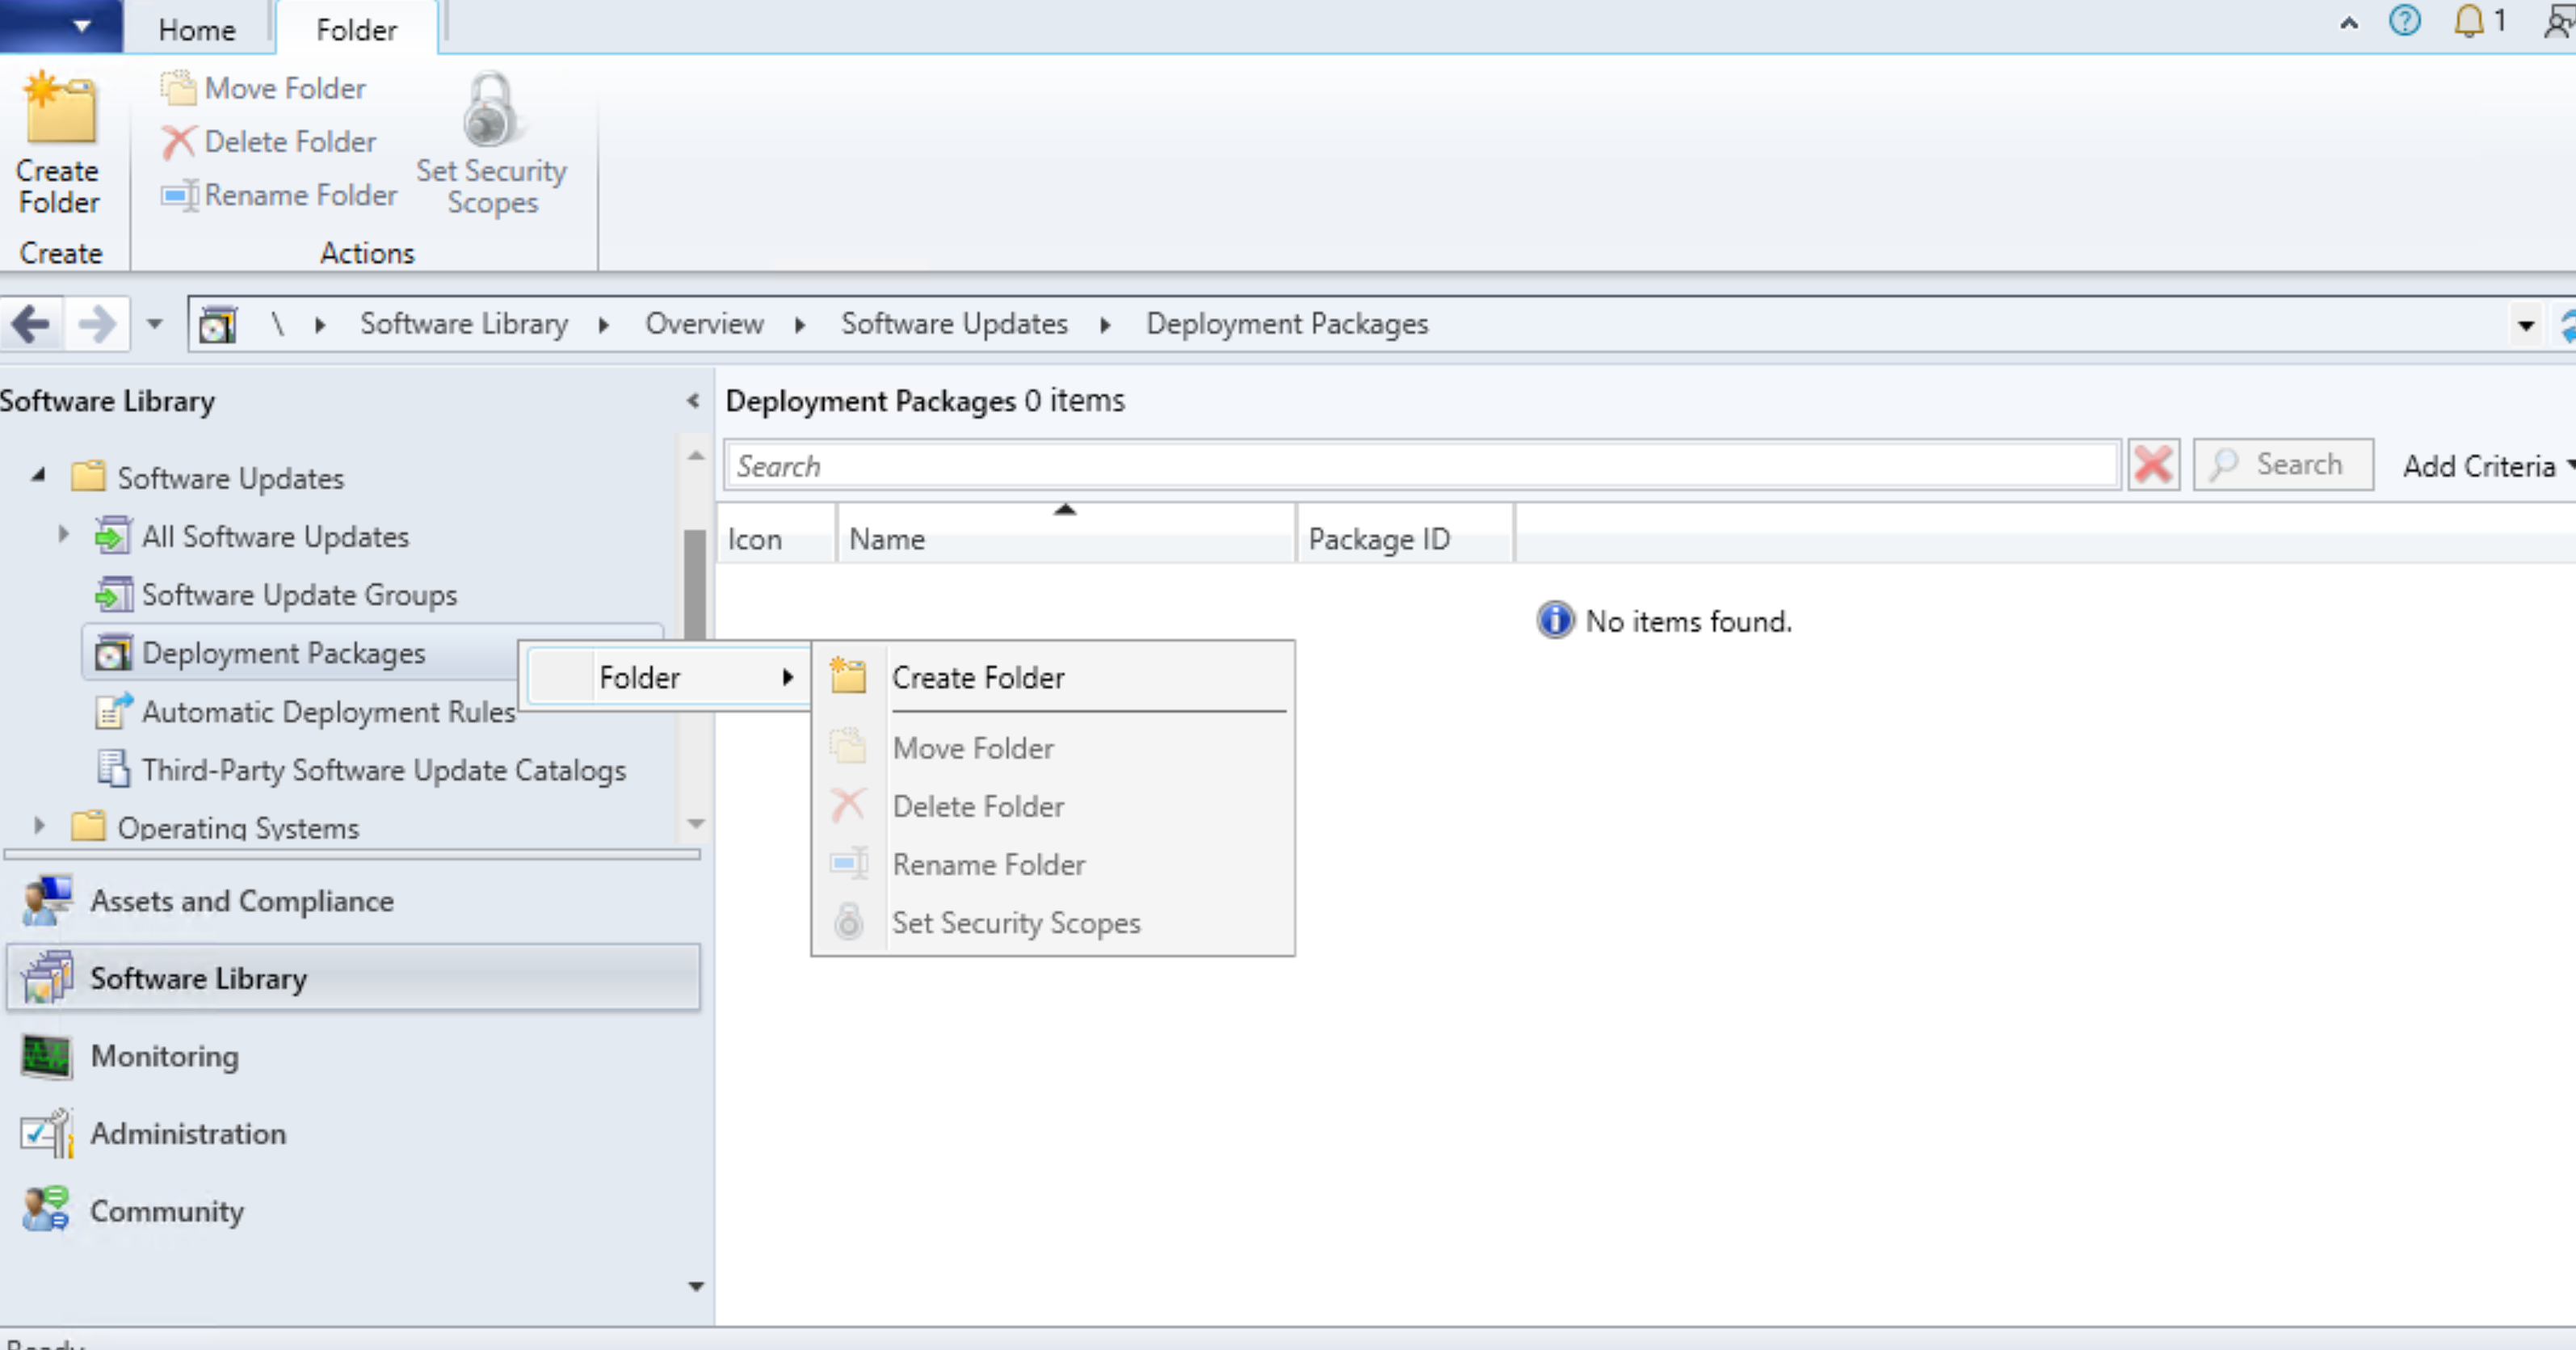 Screenshot of right-click menu displaying folder options for the Deployment Packages node.